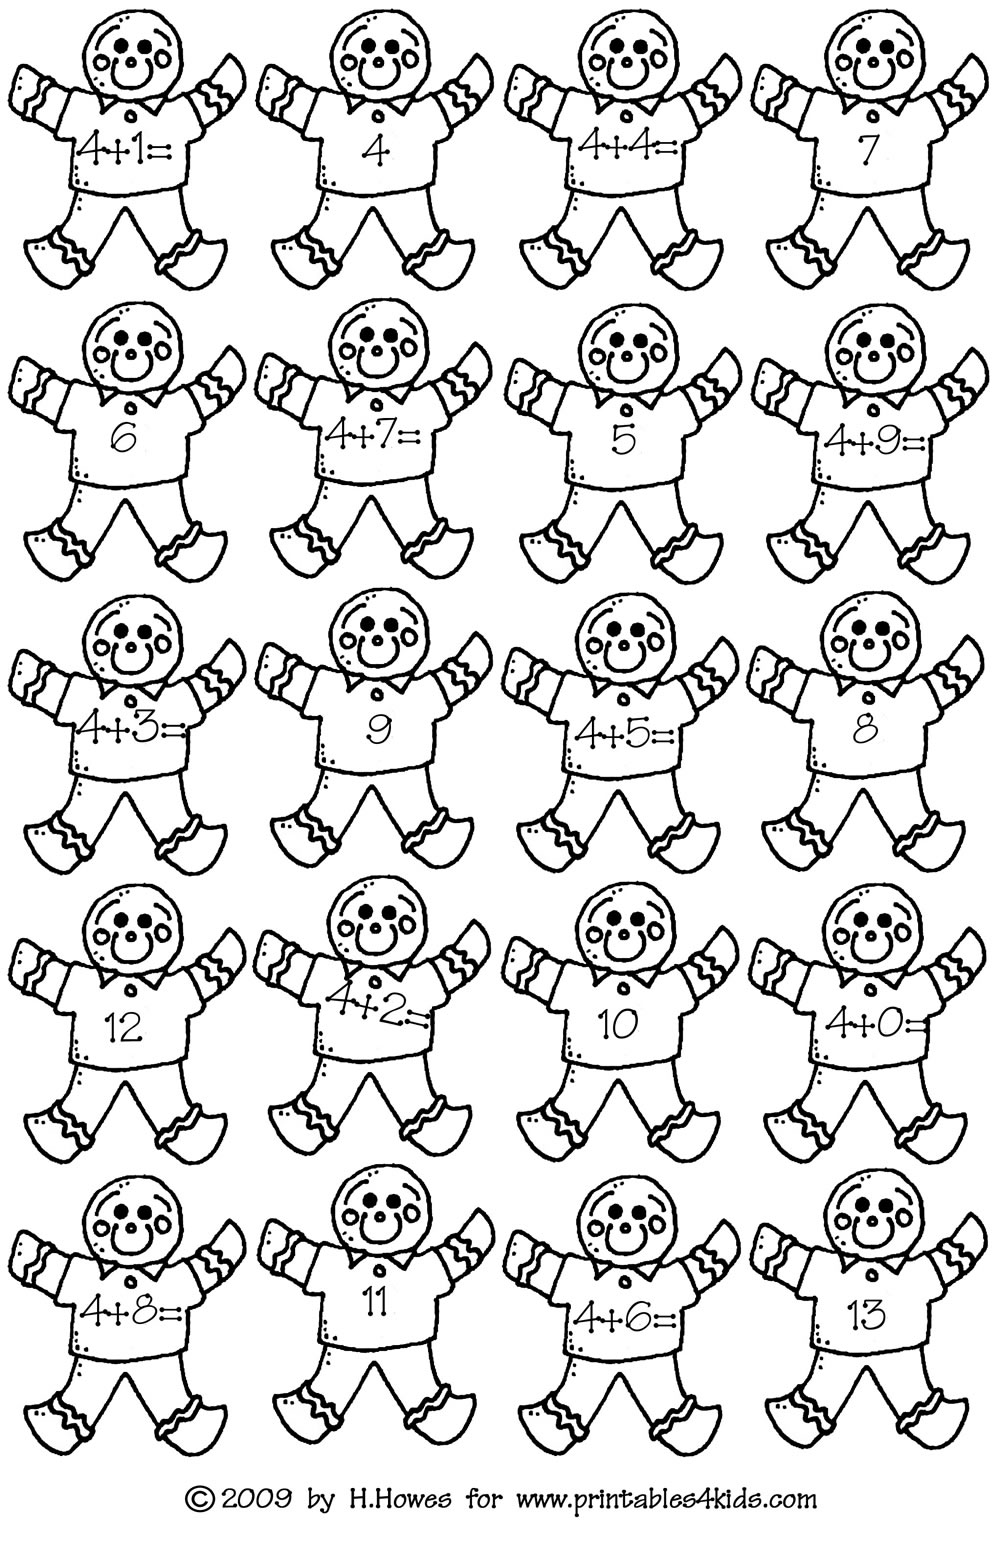 Gingerbread Math Addition Facts 4s Printables For Kids Free Word Search Puzzles Coloring